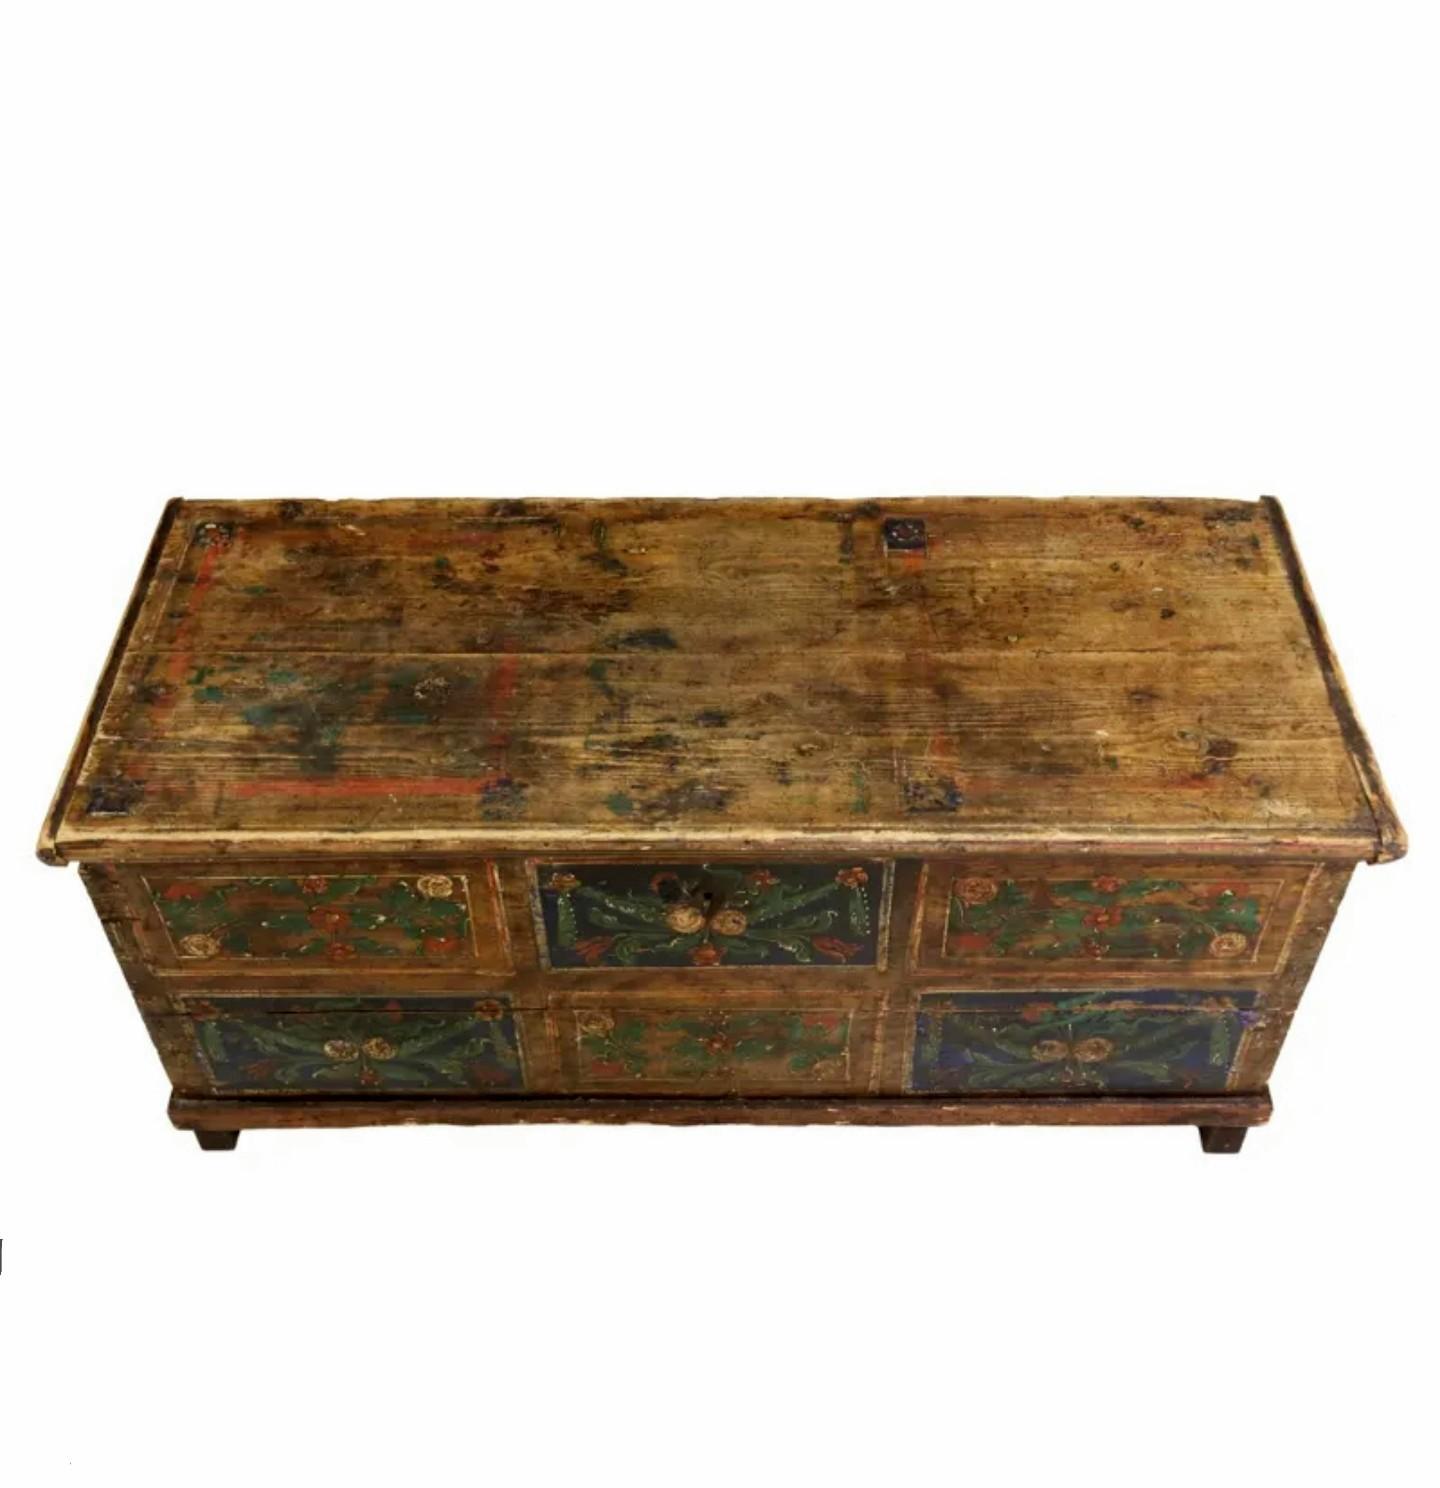 Early 19th Century Scandinavian Hand-Painted Pine Blanket Chest In Good Condition For Sale In Forney, TX